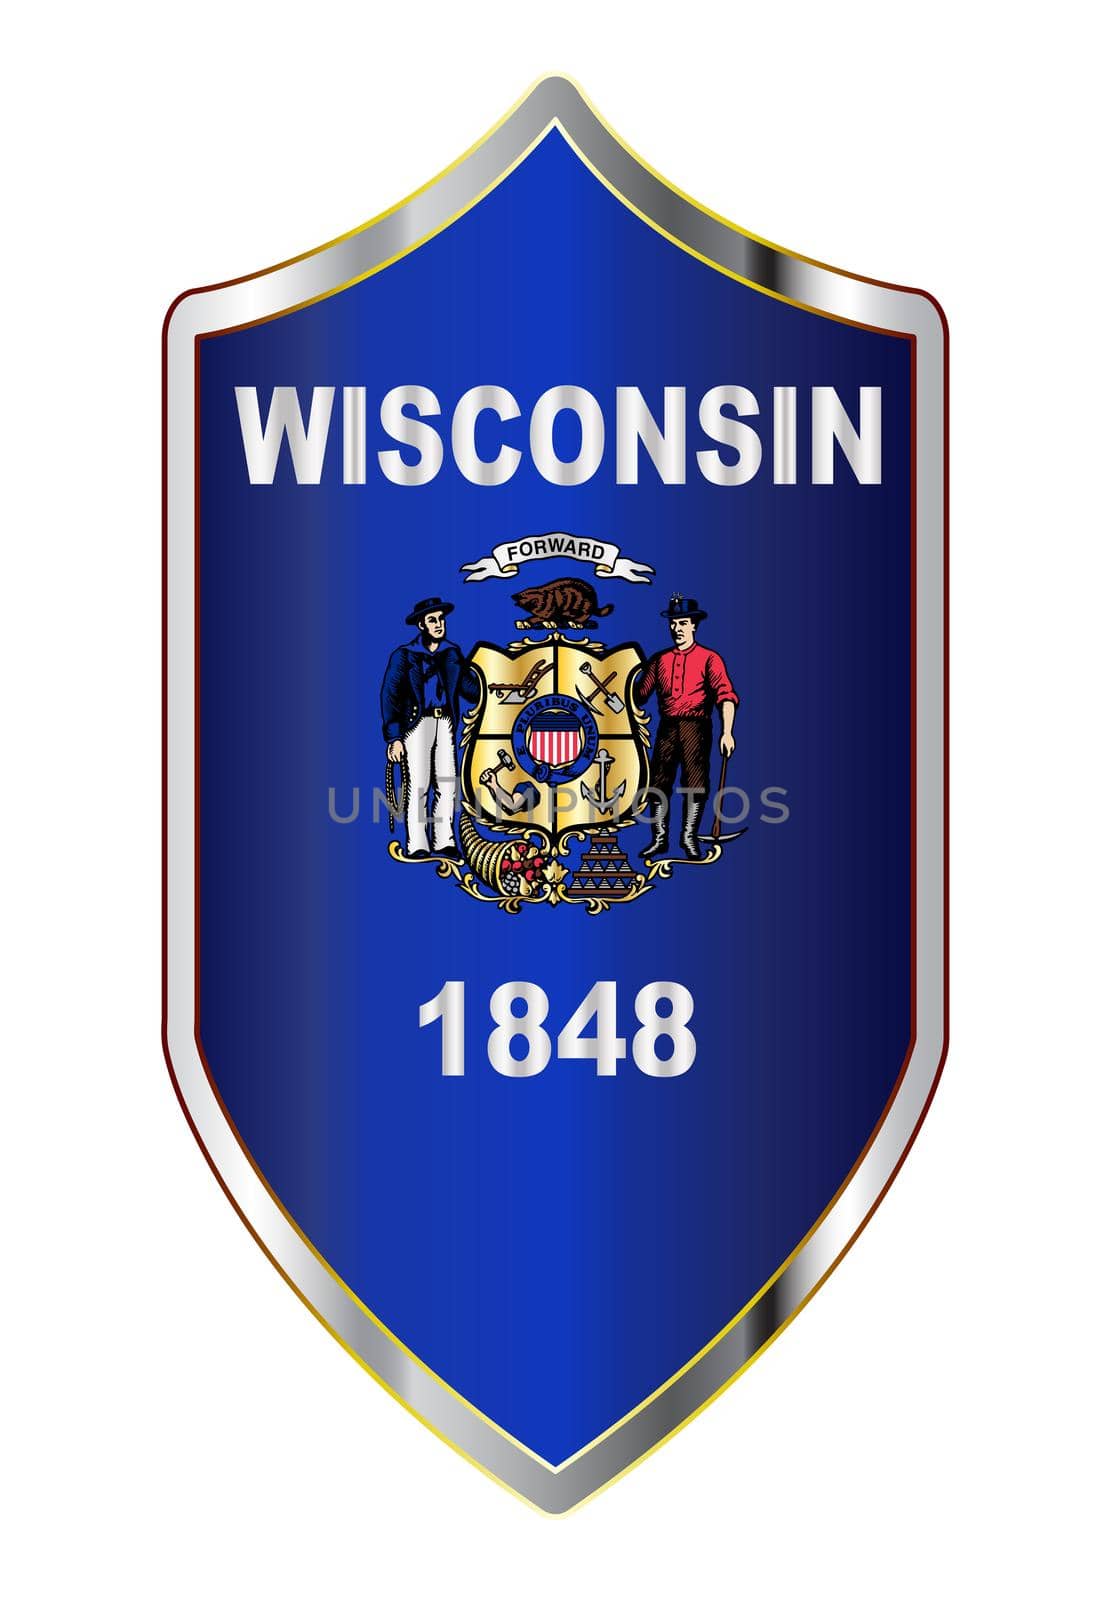 A typical crusader type shield with the state flag of Wisconsin all isolated on a white background